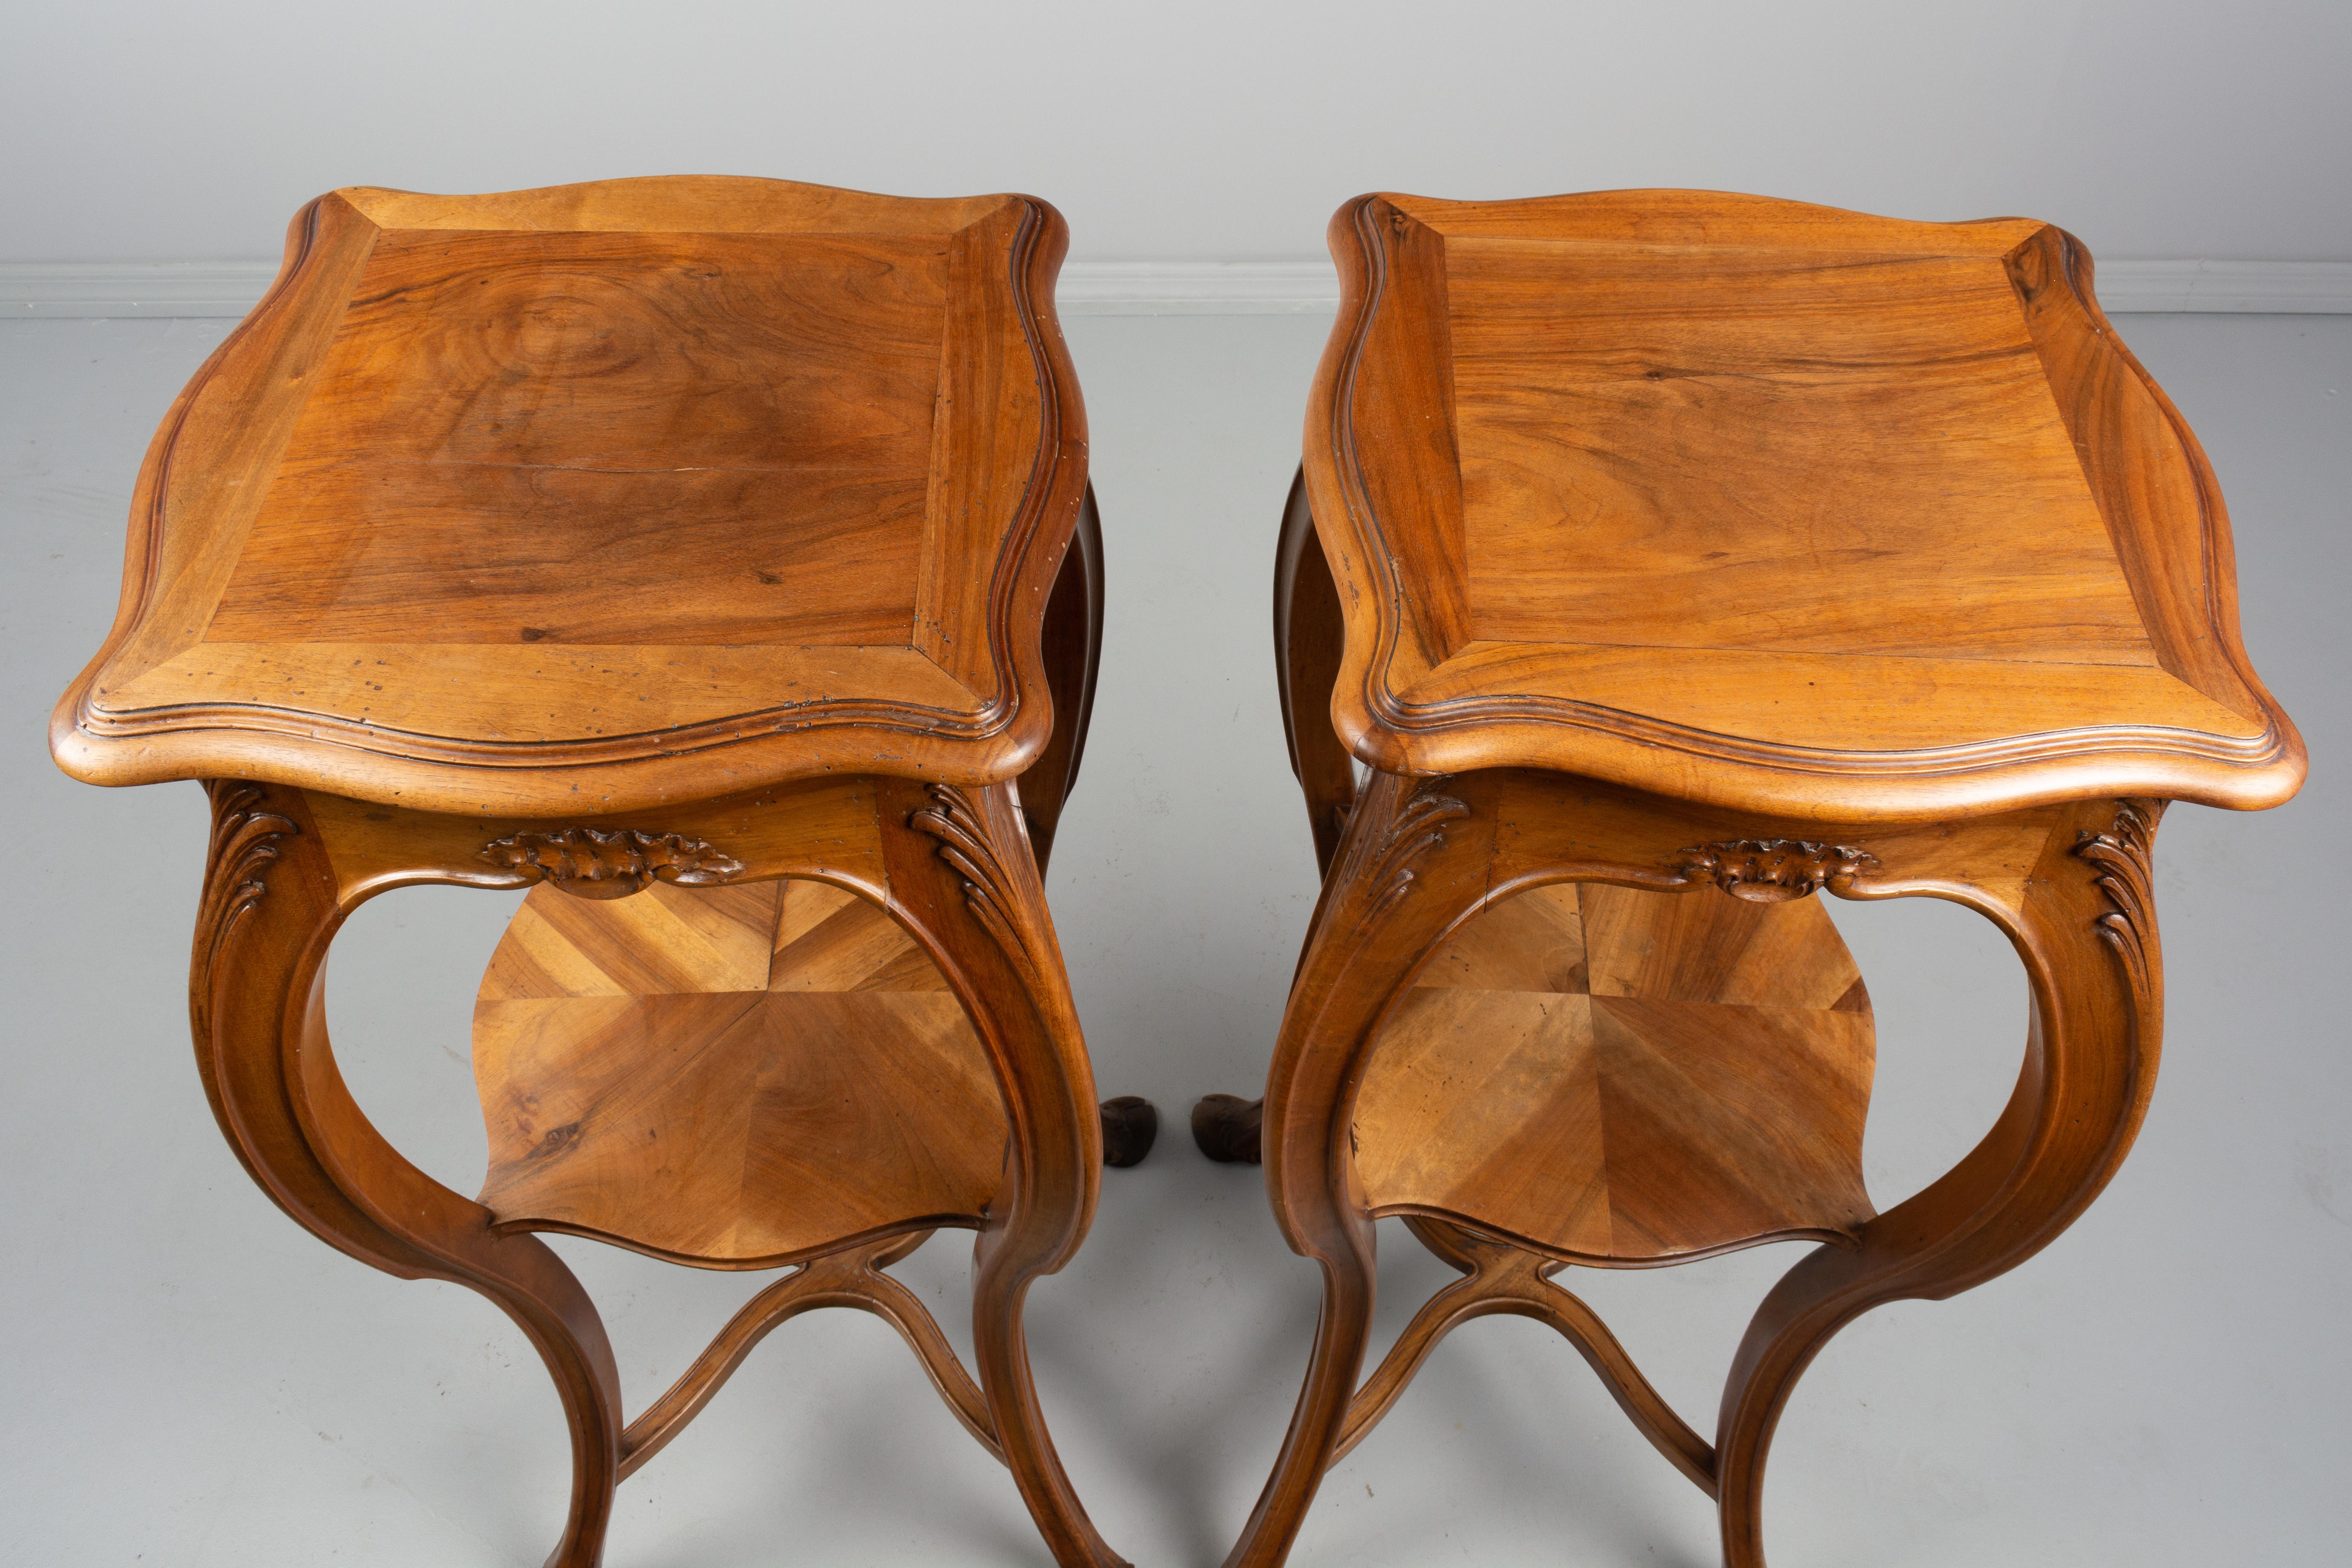 Walnut Pair of French Art Nouveau Sellettes or Tall Pedestals For Sale